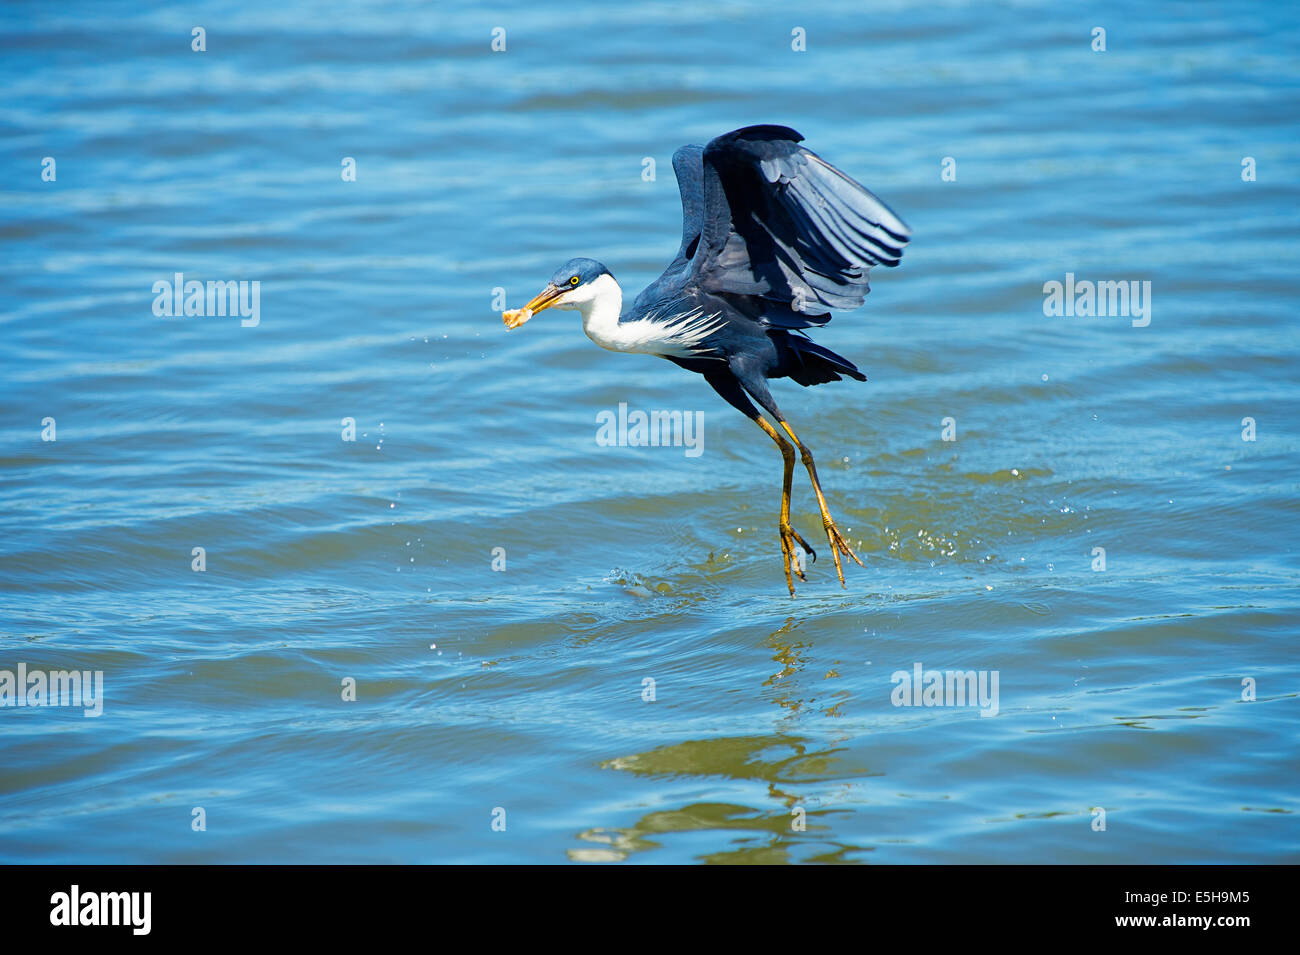 Pied Heron on the Mary River, Northern Territory Australia Stock Photo ...